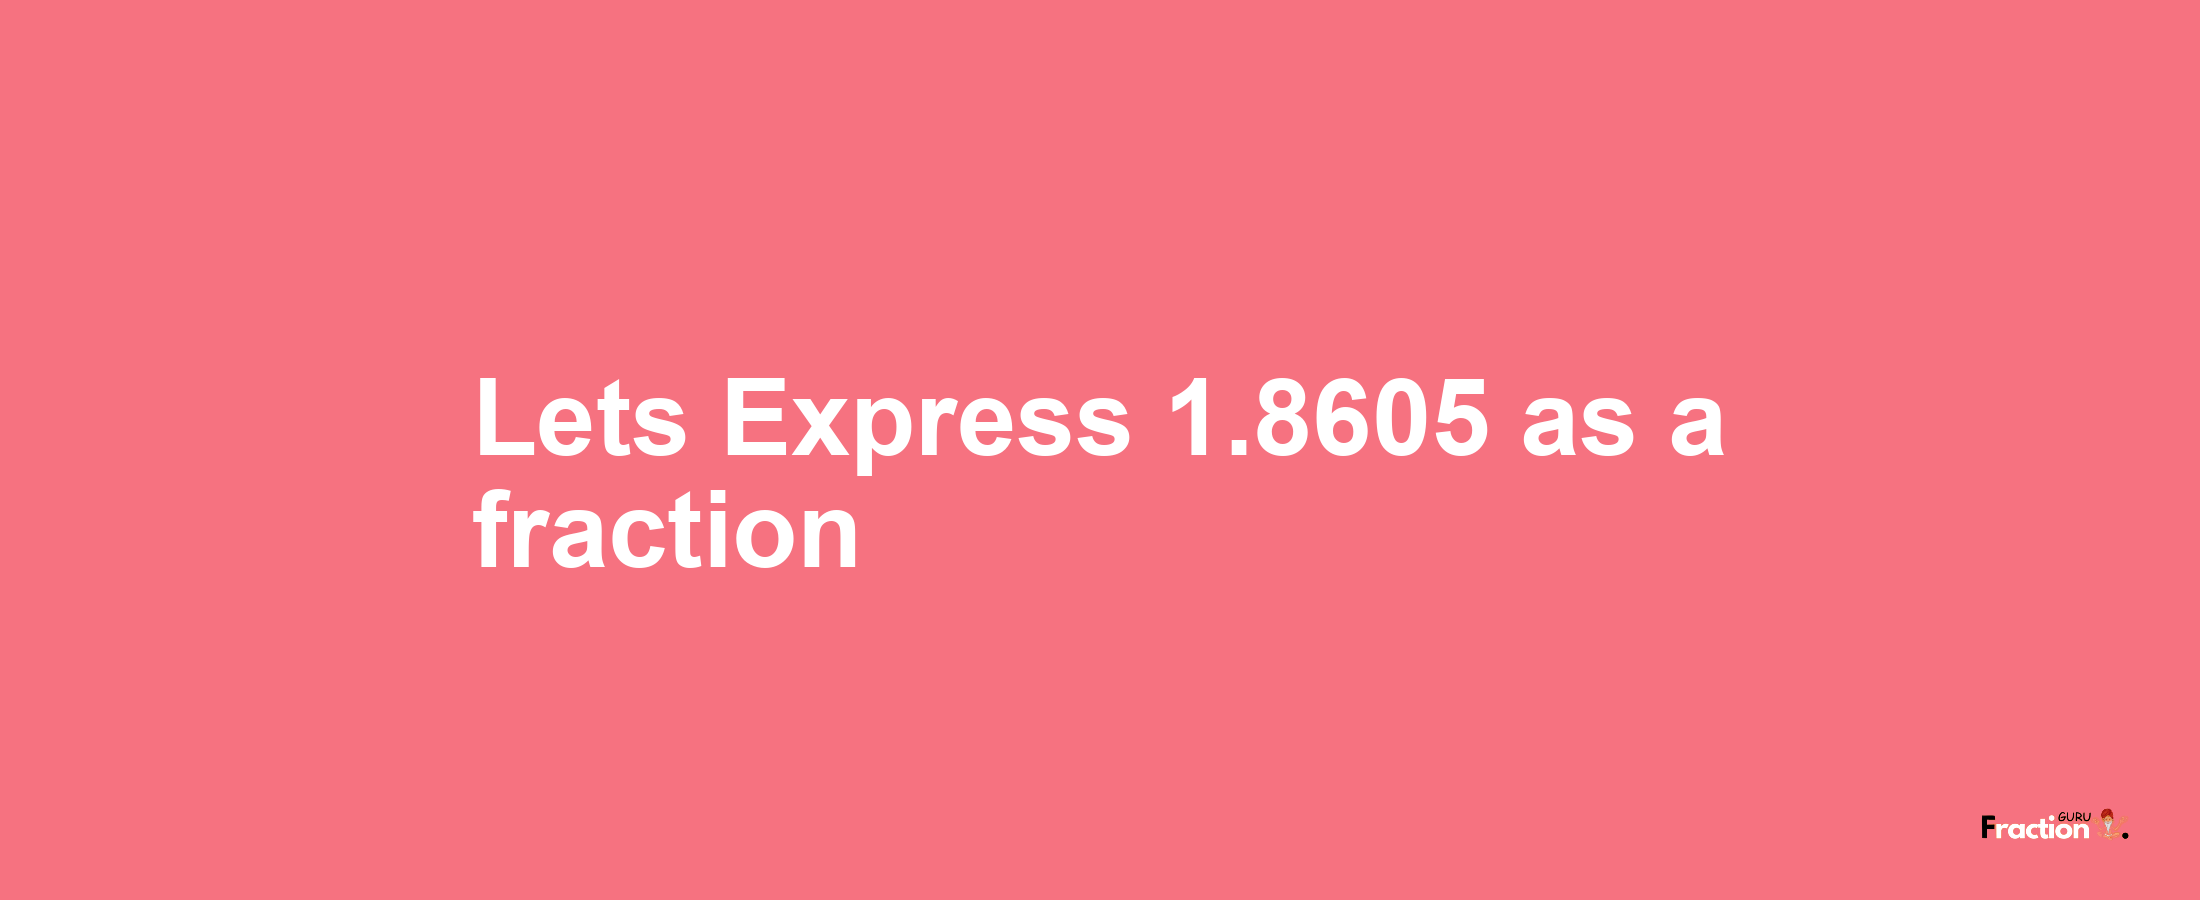 Lets Express 1.8605 as afraction